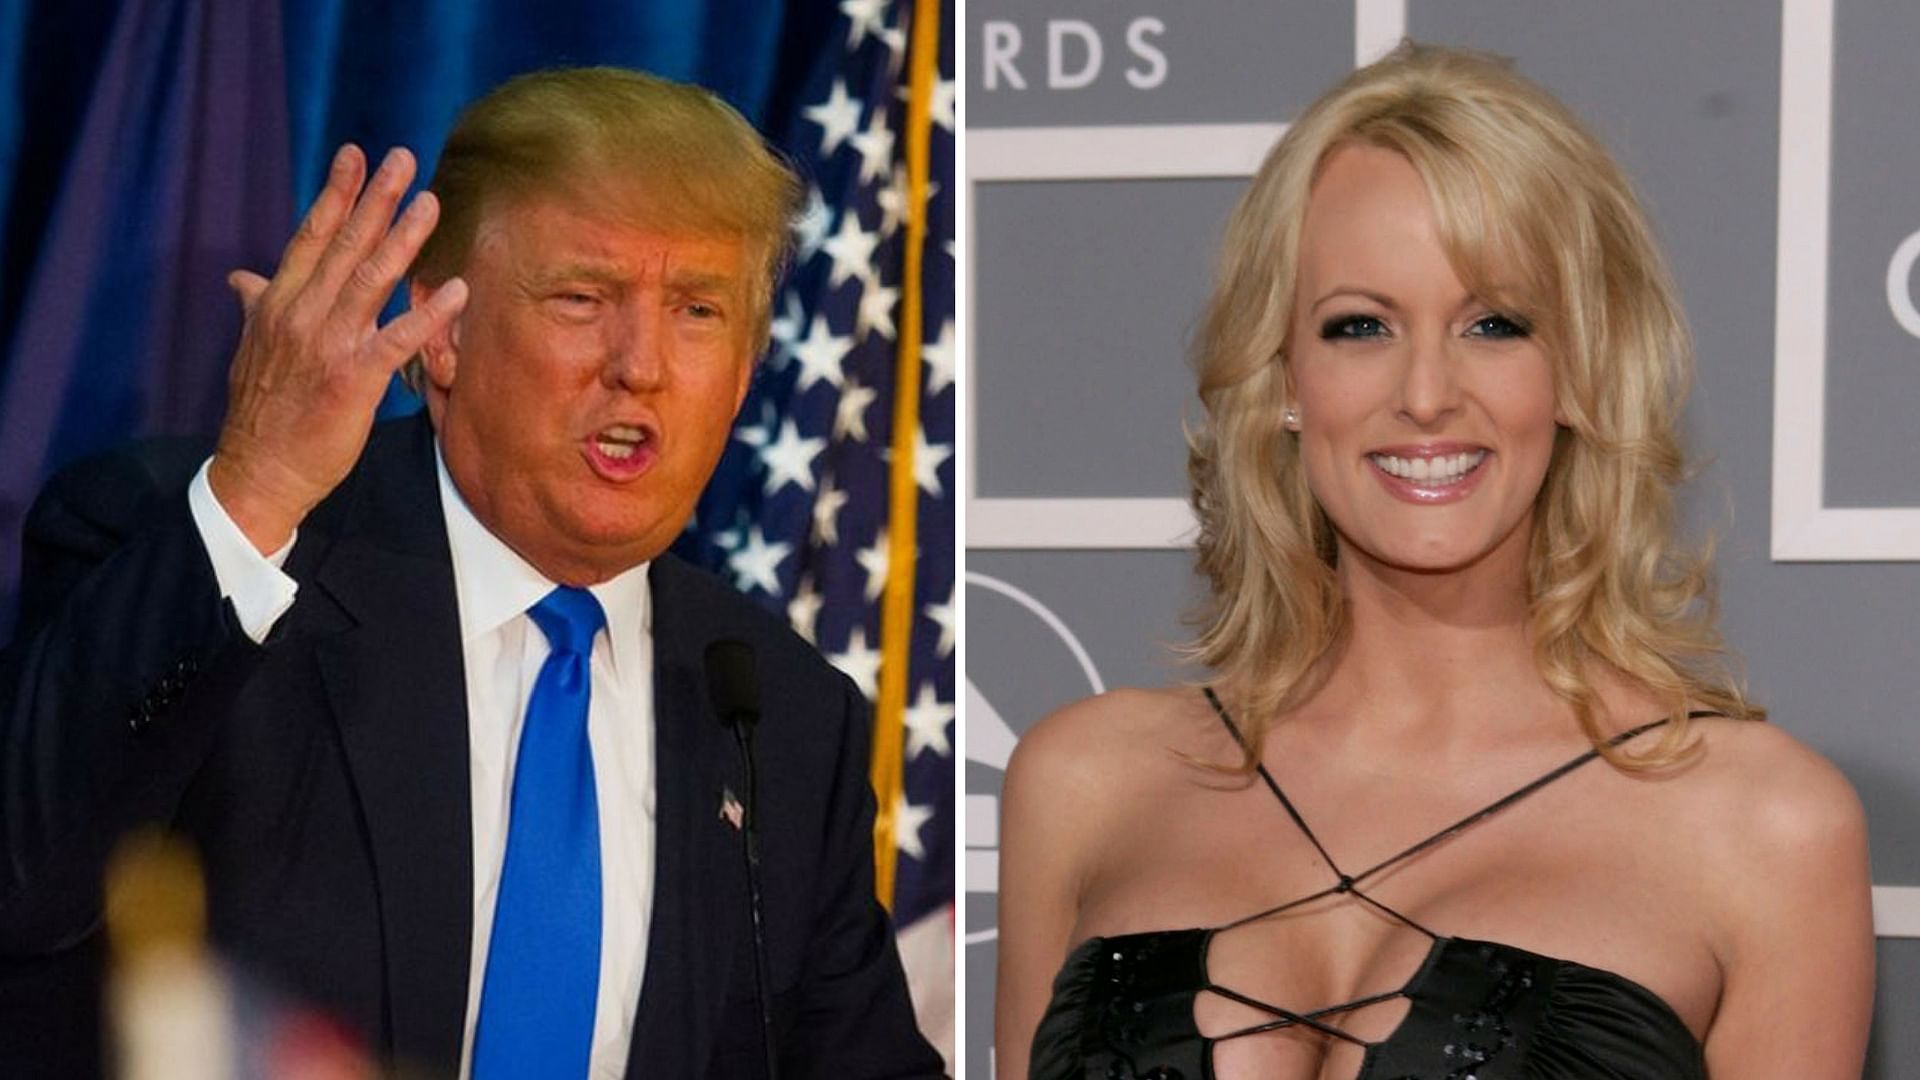 US President Donald Trump and adult film actress Stormy Daniels.